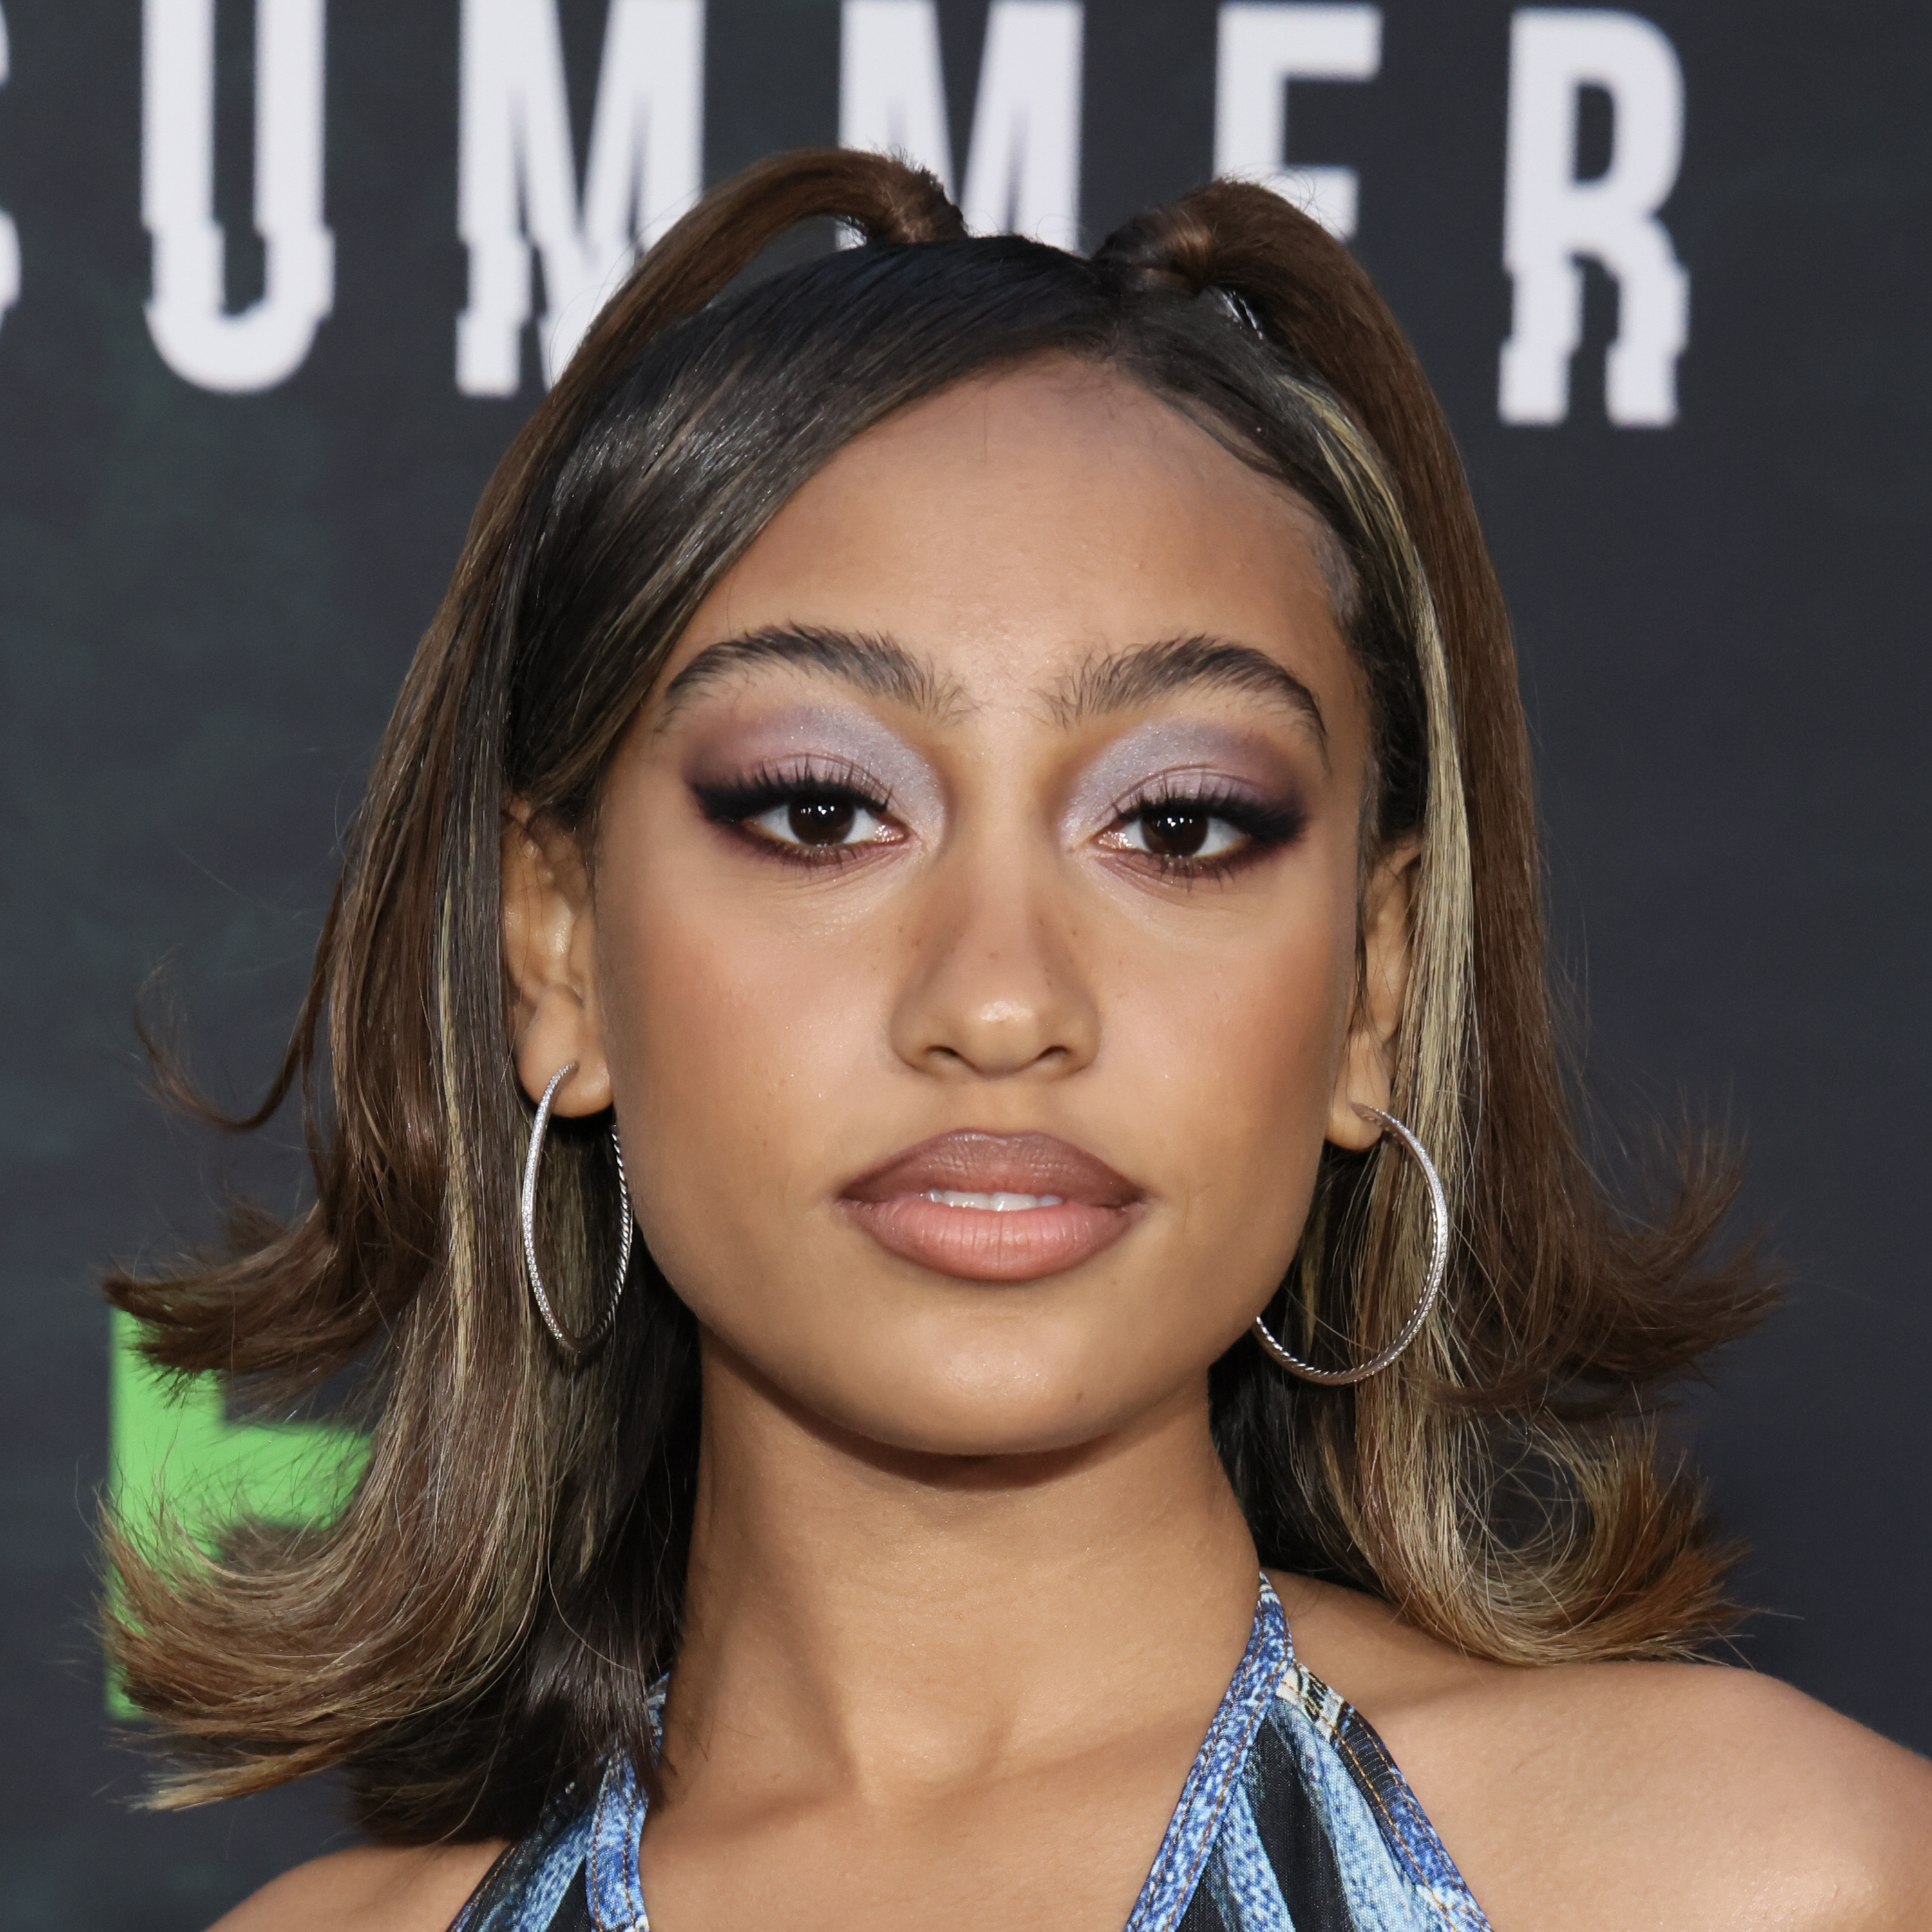 Lexi Underwood a the premiere of "Cruel Summer" season 2 on May 31, 2023, in Los Angeles, California. | Source: Getty Images